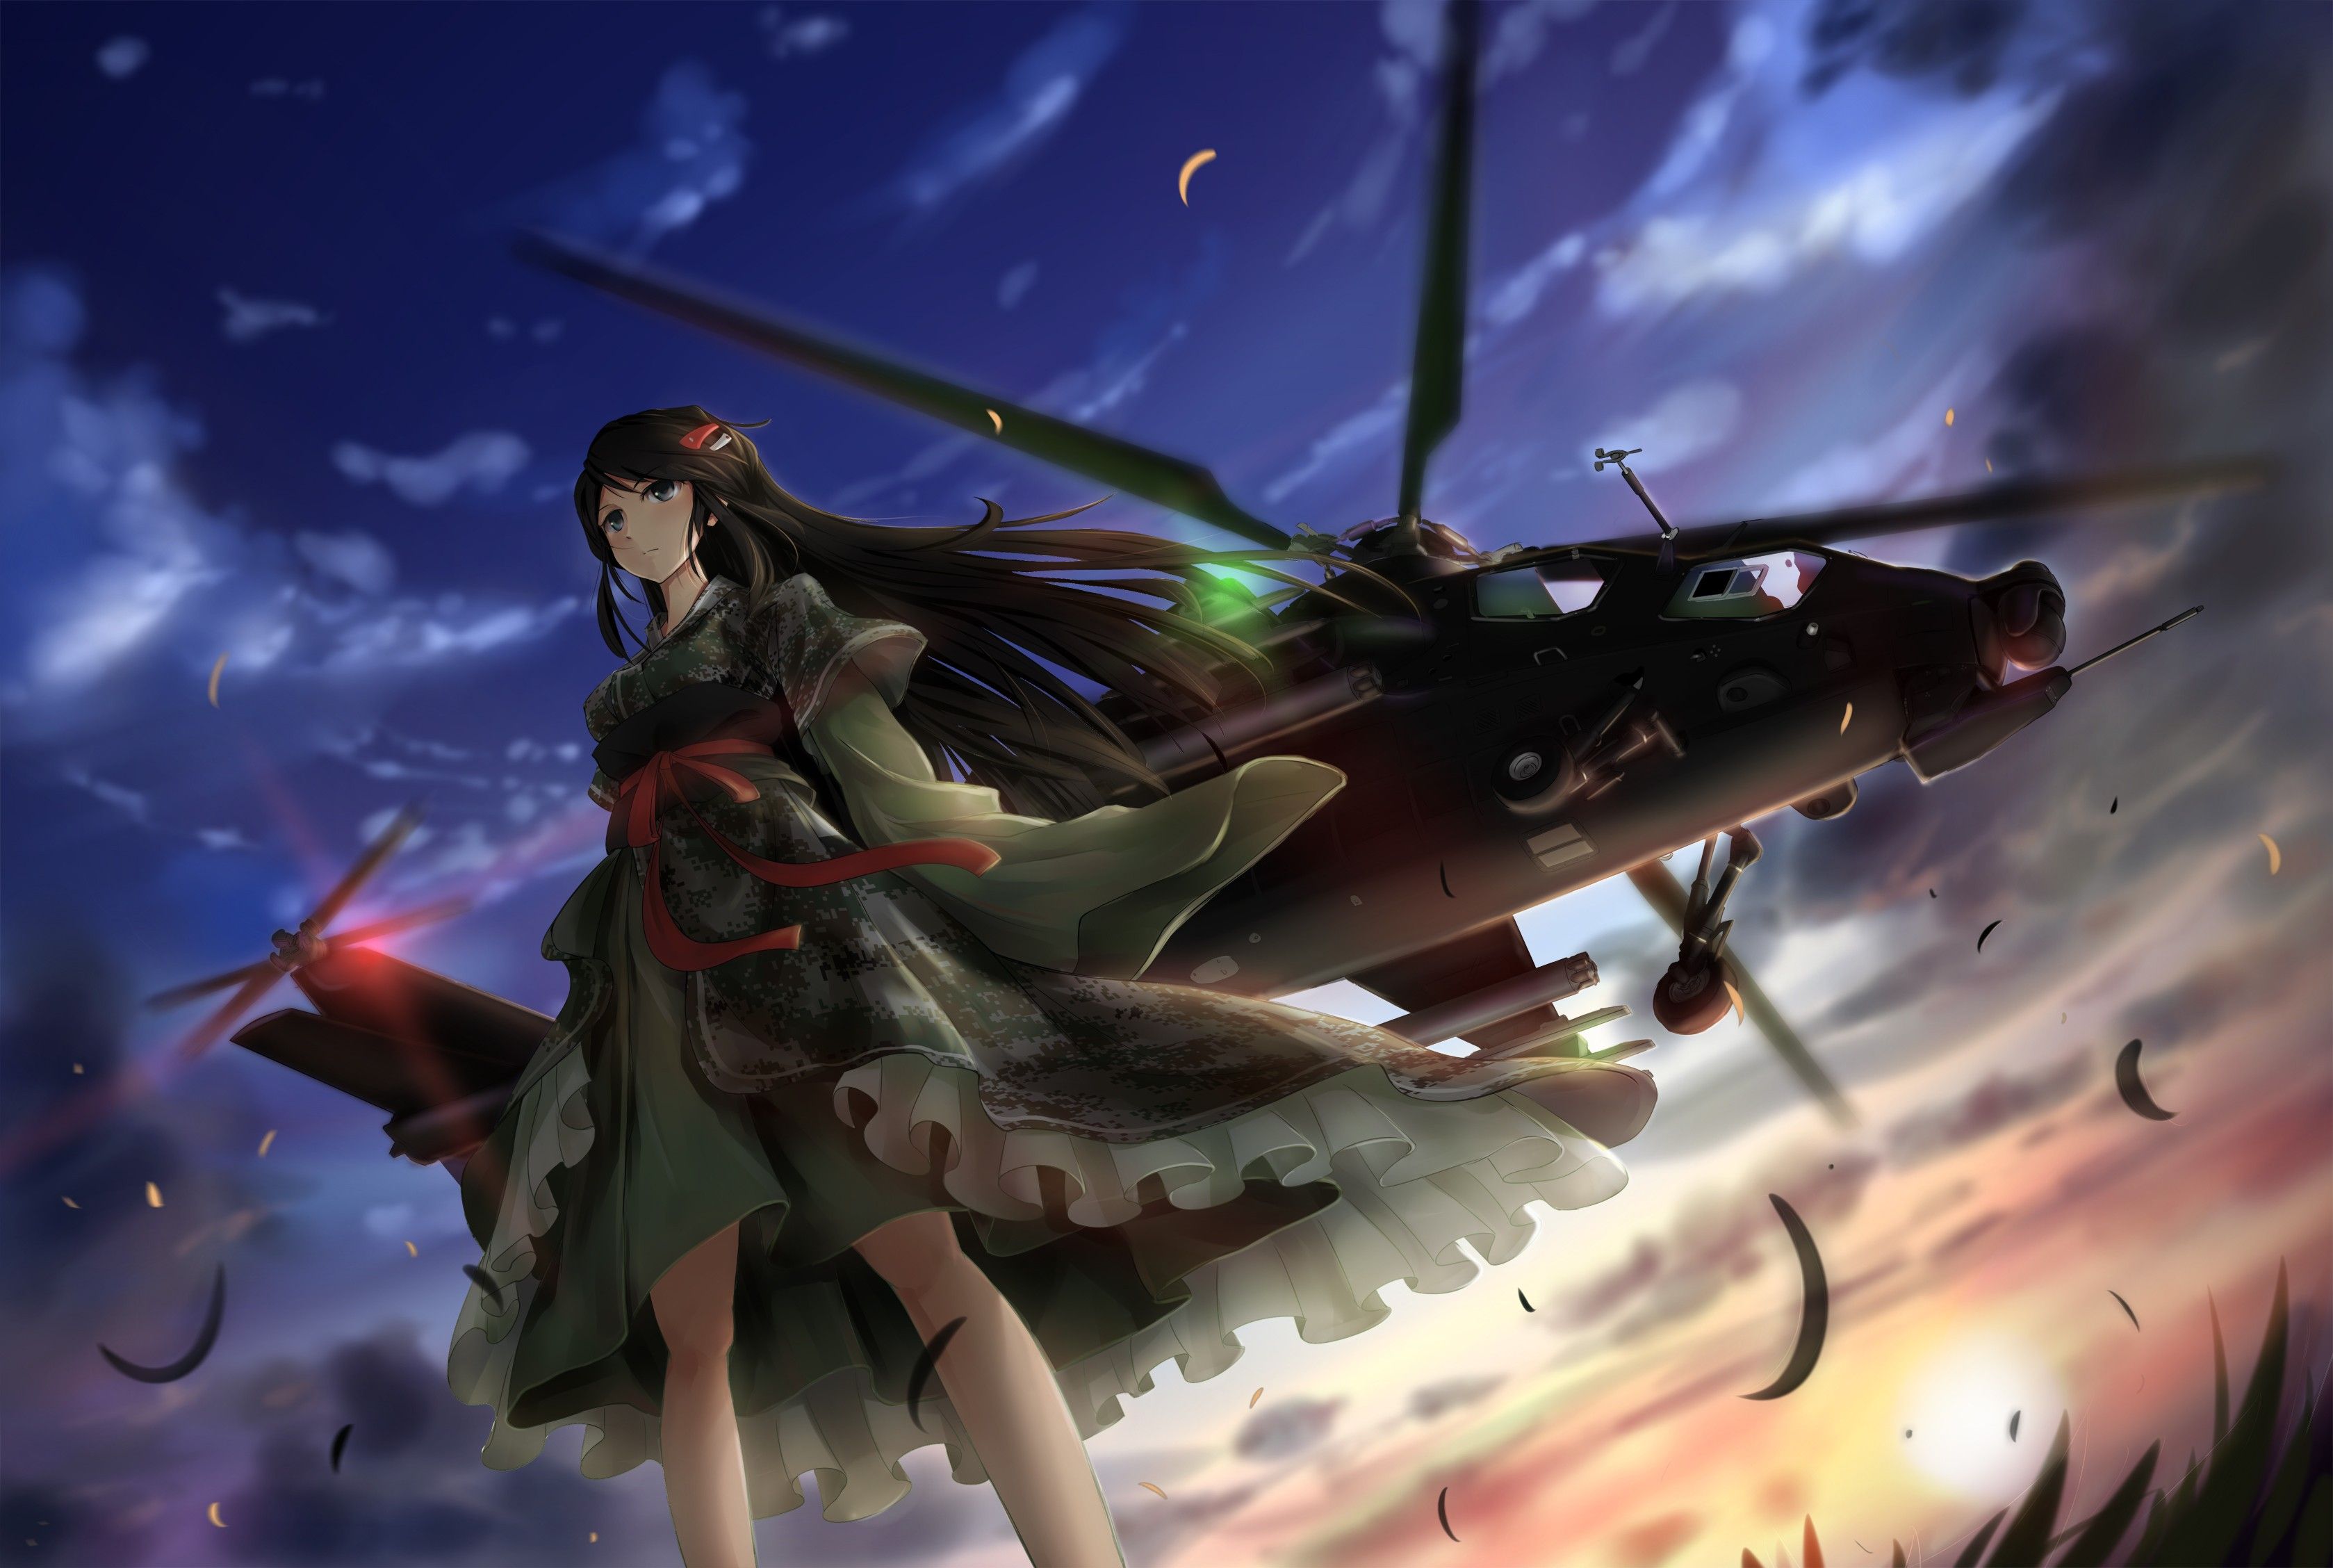 #anime girls, #helicopters, #TC #military, wallpaper